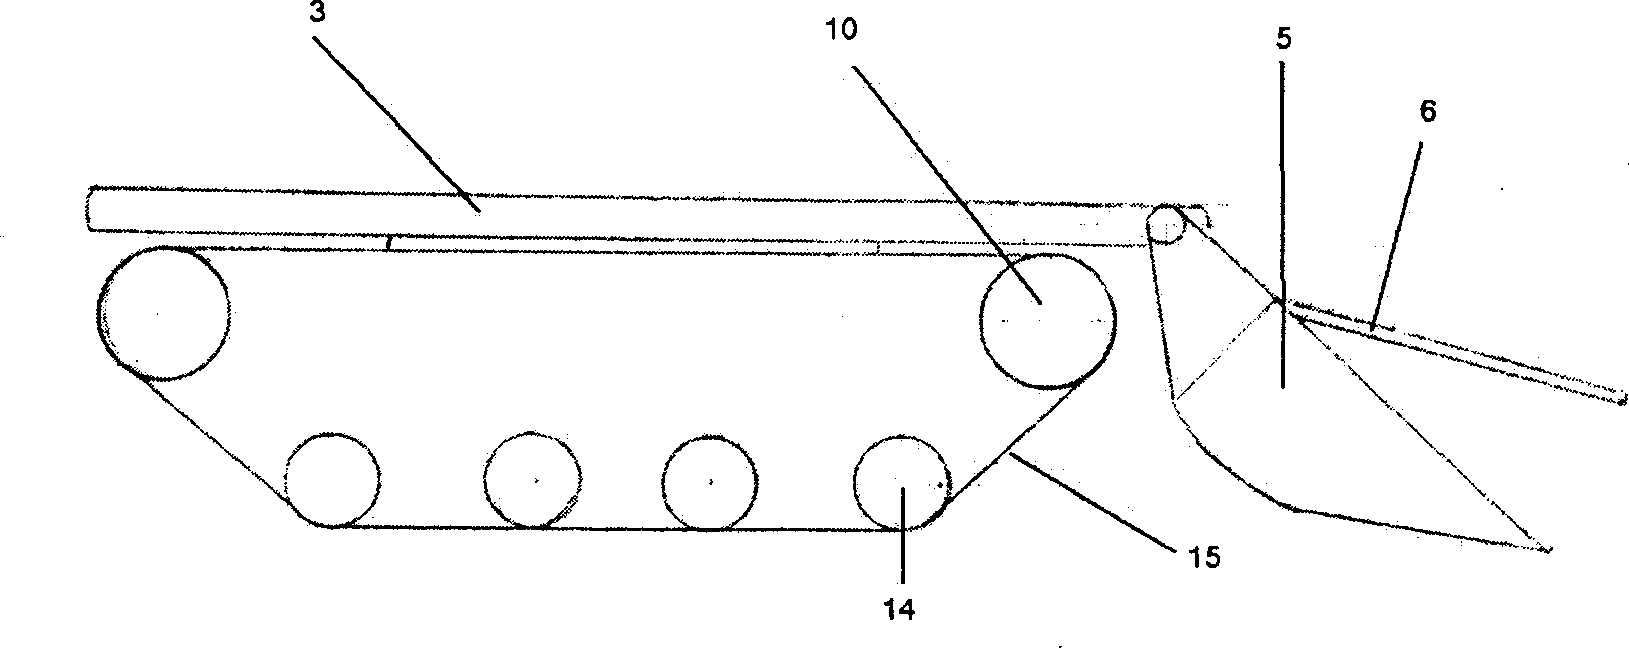 Quantitative aseptic sampling device for pipe scale and its method